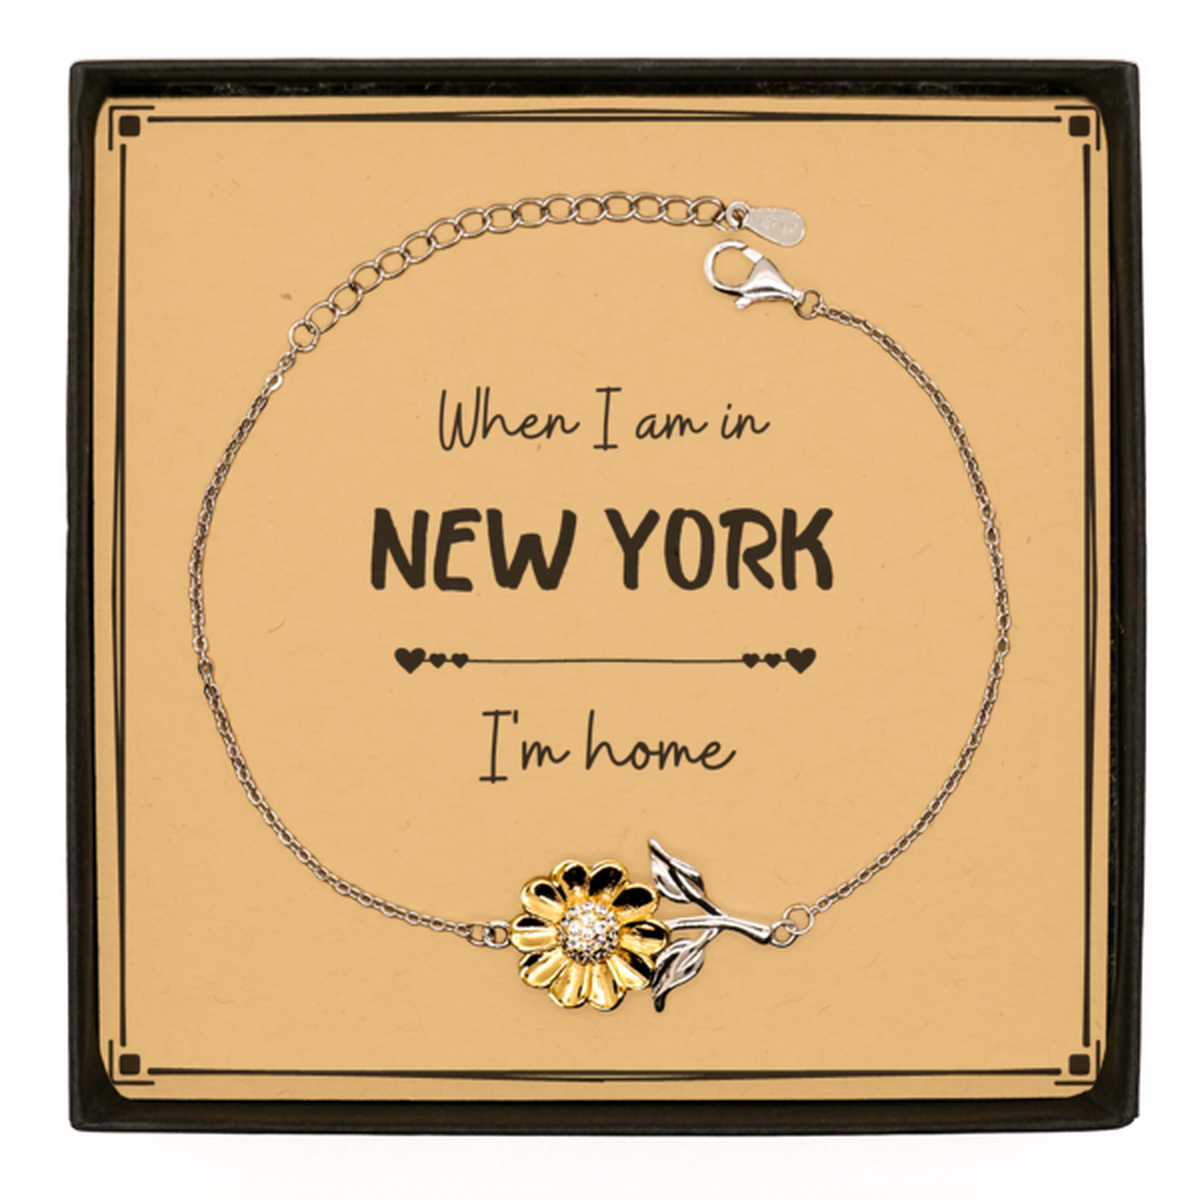 When I am in New York I'm home Sunflower Bracelet, Message Card Gifts For New York, State New York Birthday Gifts for Friends Coworker